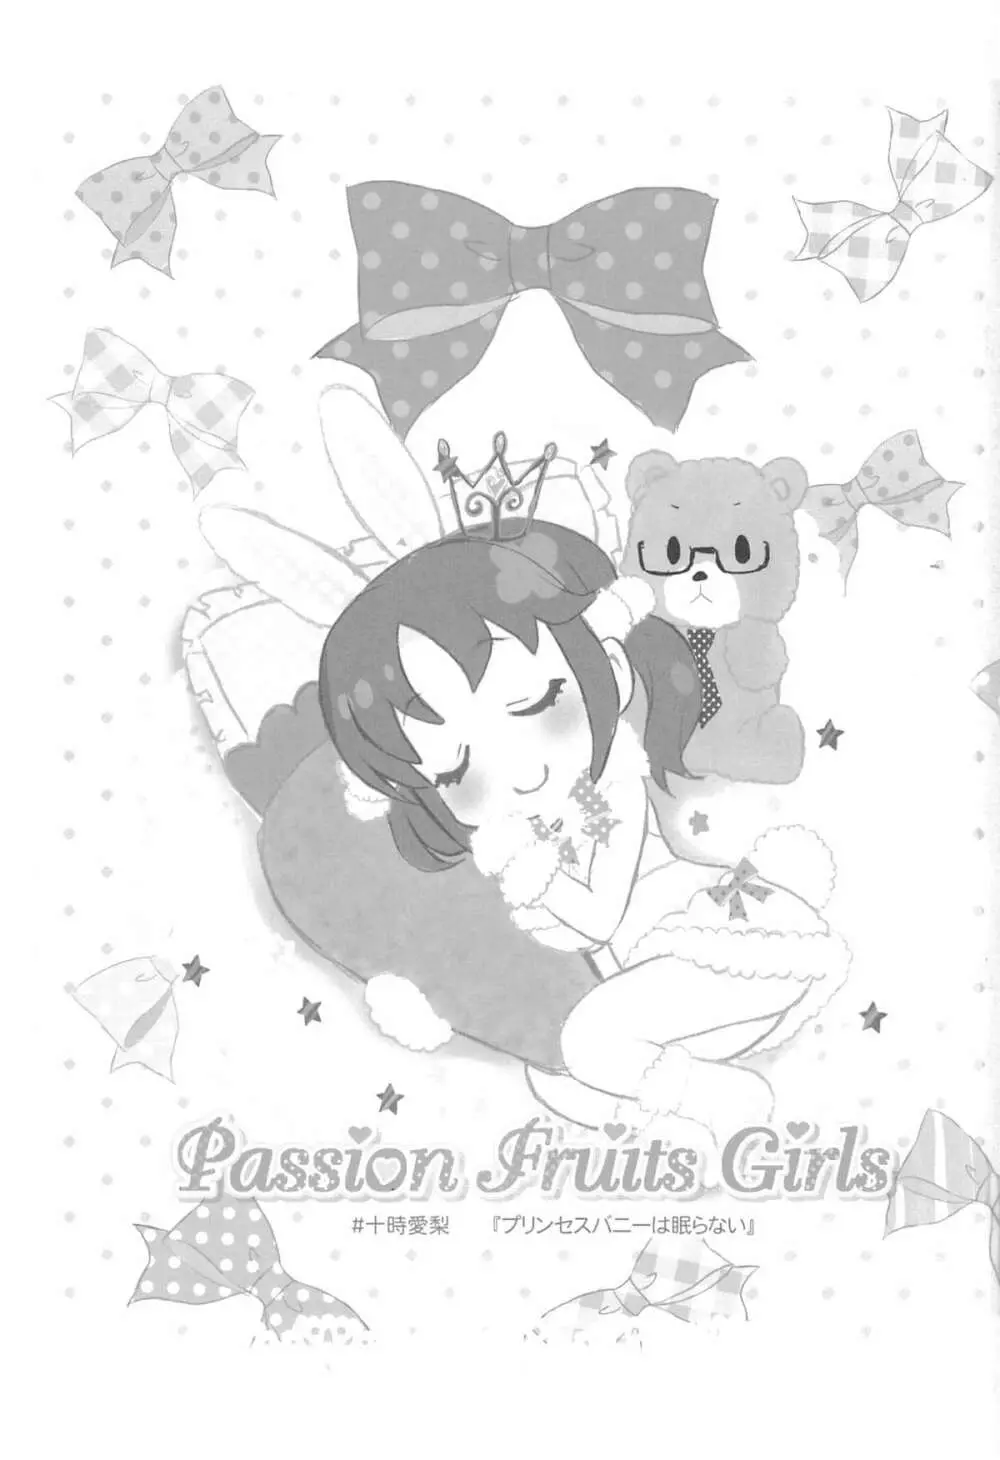 Passion Fruit Girls #十時愛梨 プリンセスバニーは眠らない。 - page2